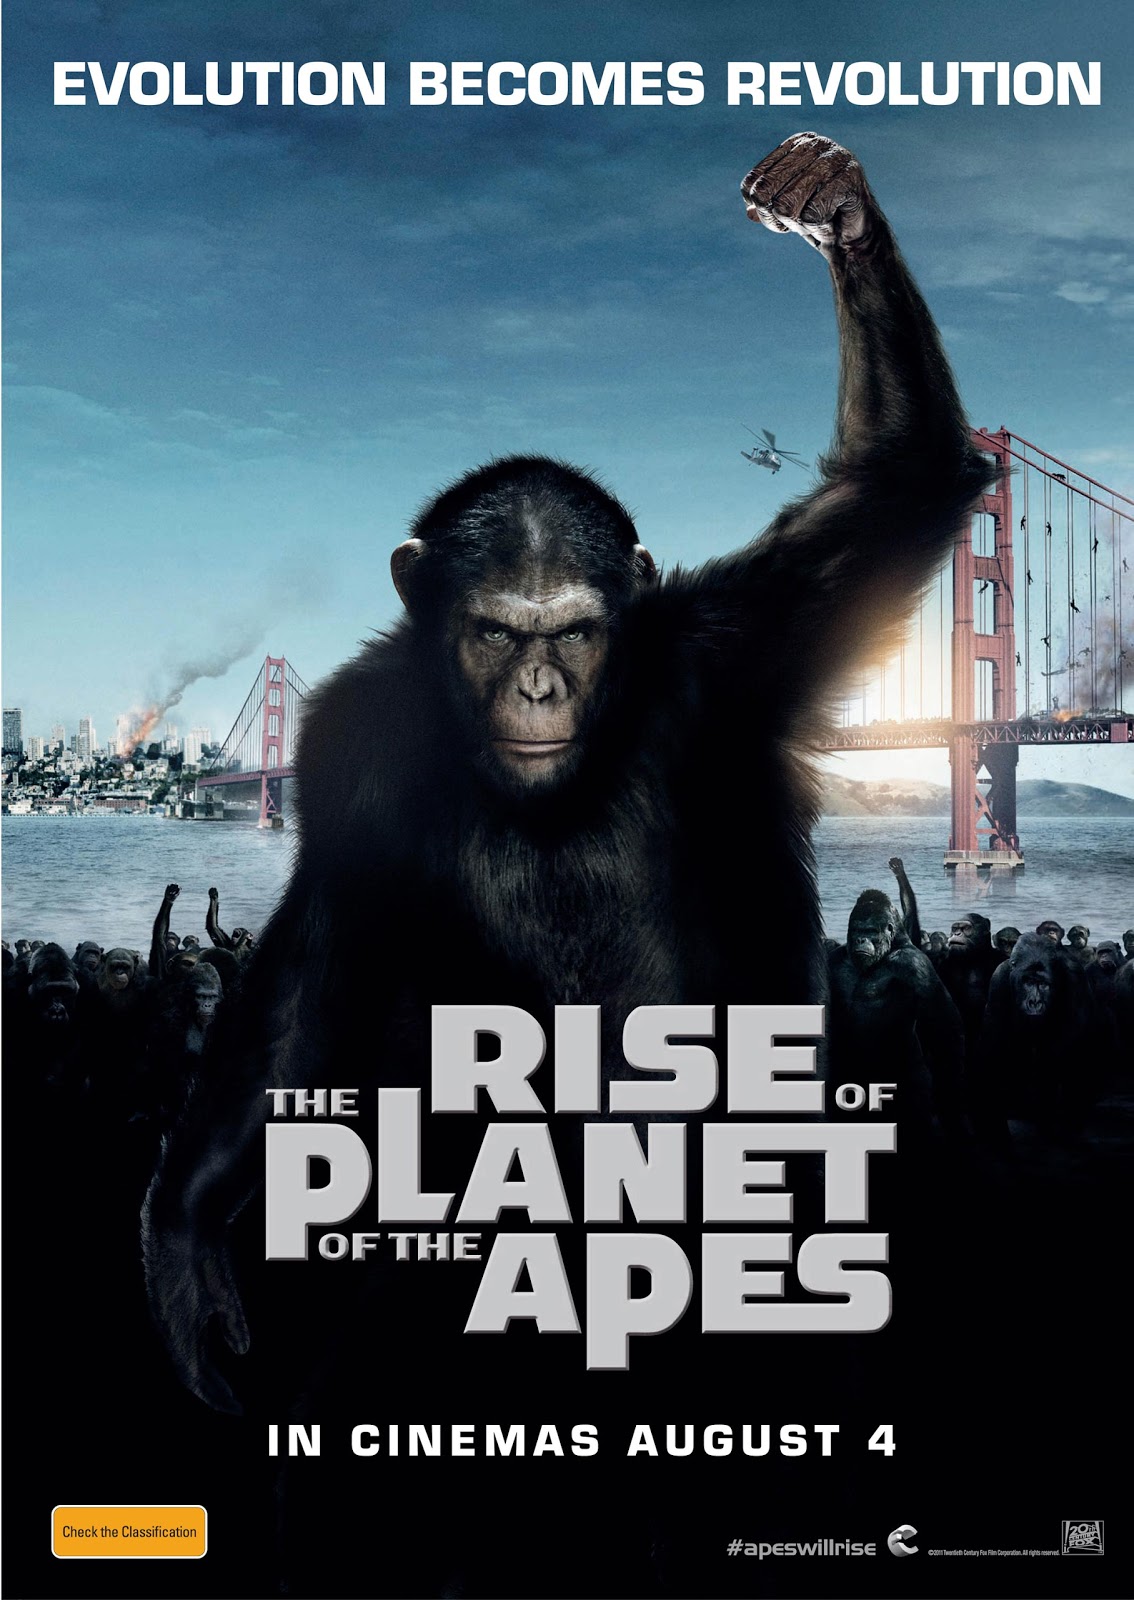 The Inquisitive Loon: Rise of the Planet of the Apes